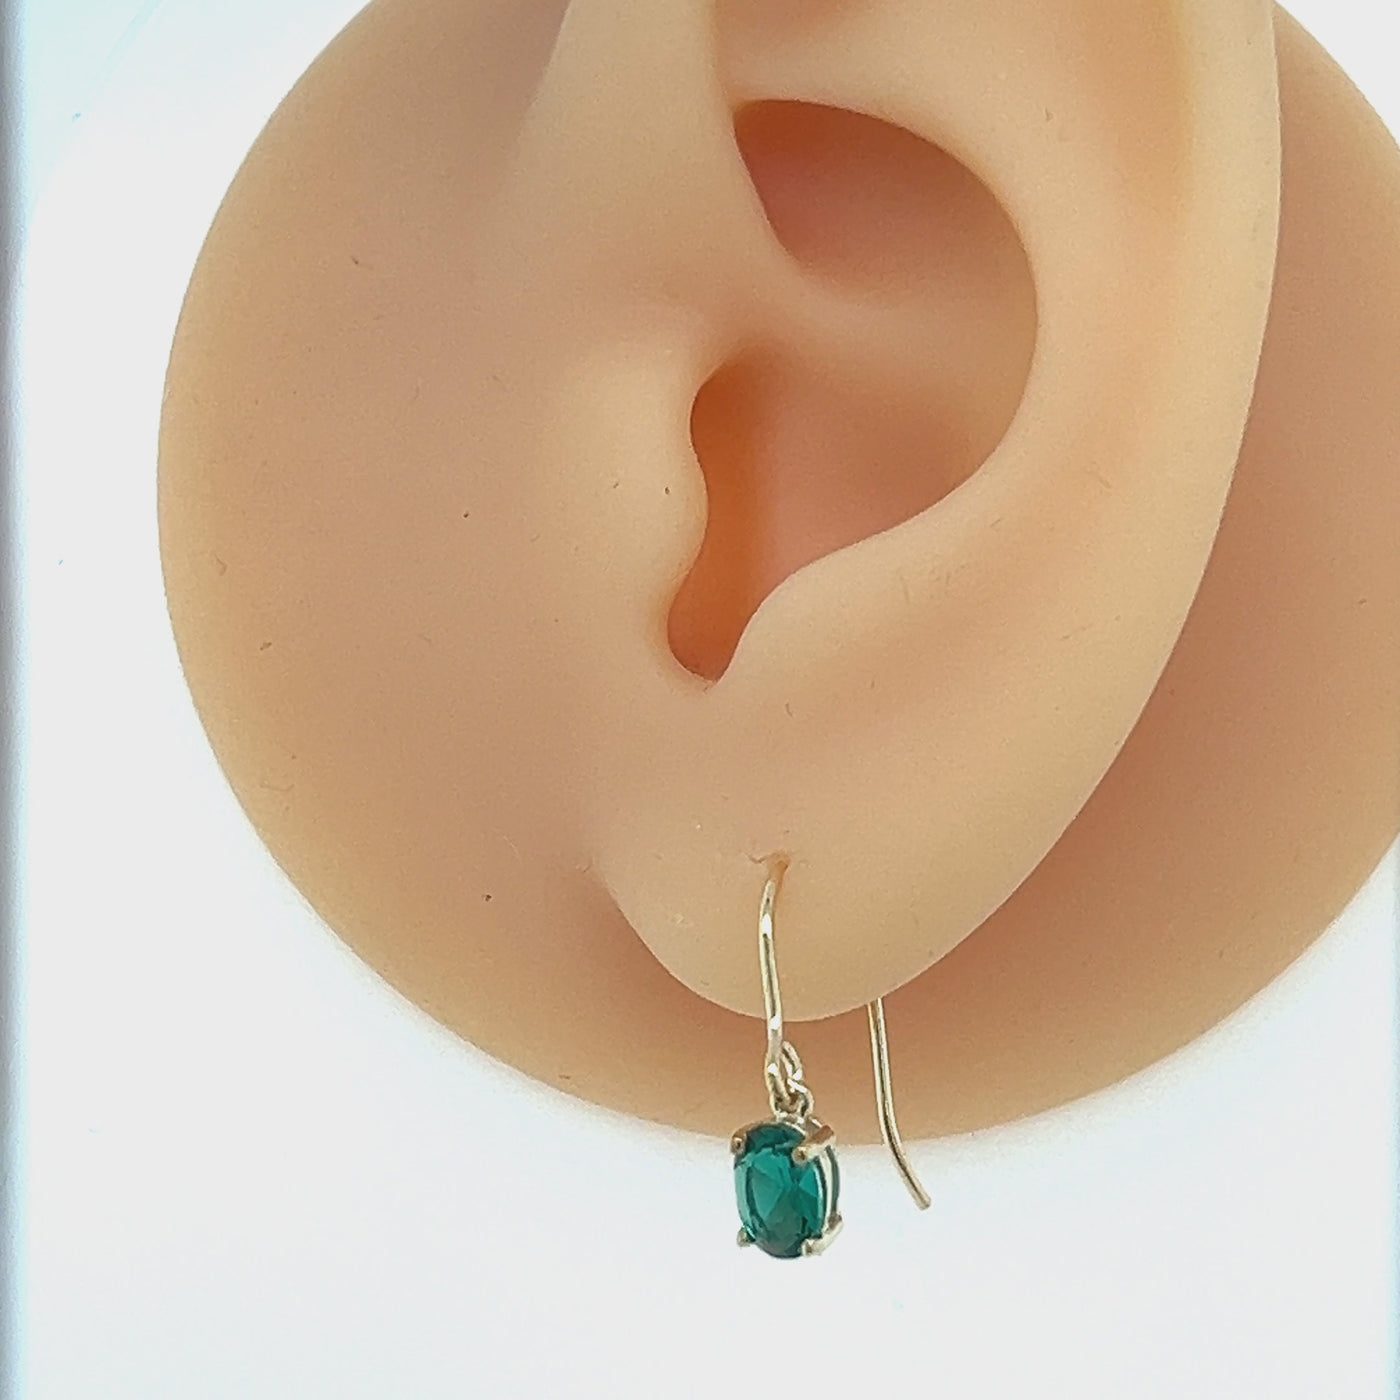 Emerald Oval Drop Earrnigs with 9ct Yellow gold fittings.